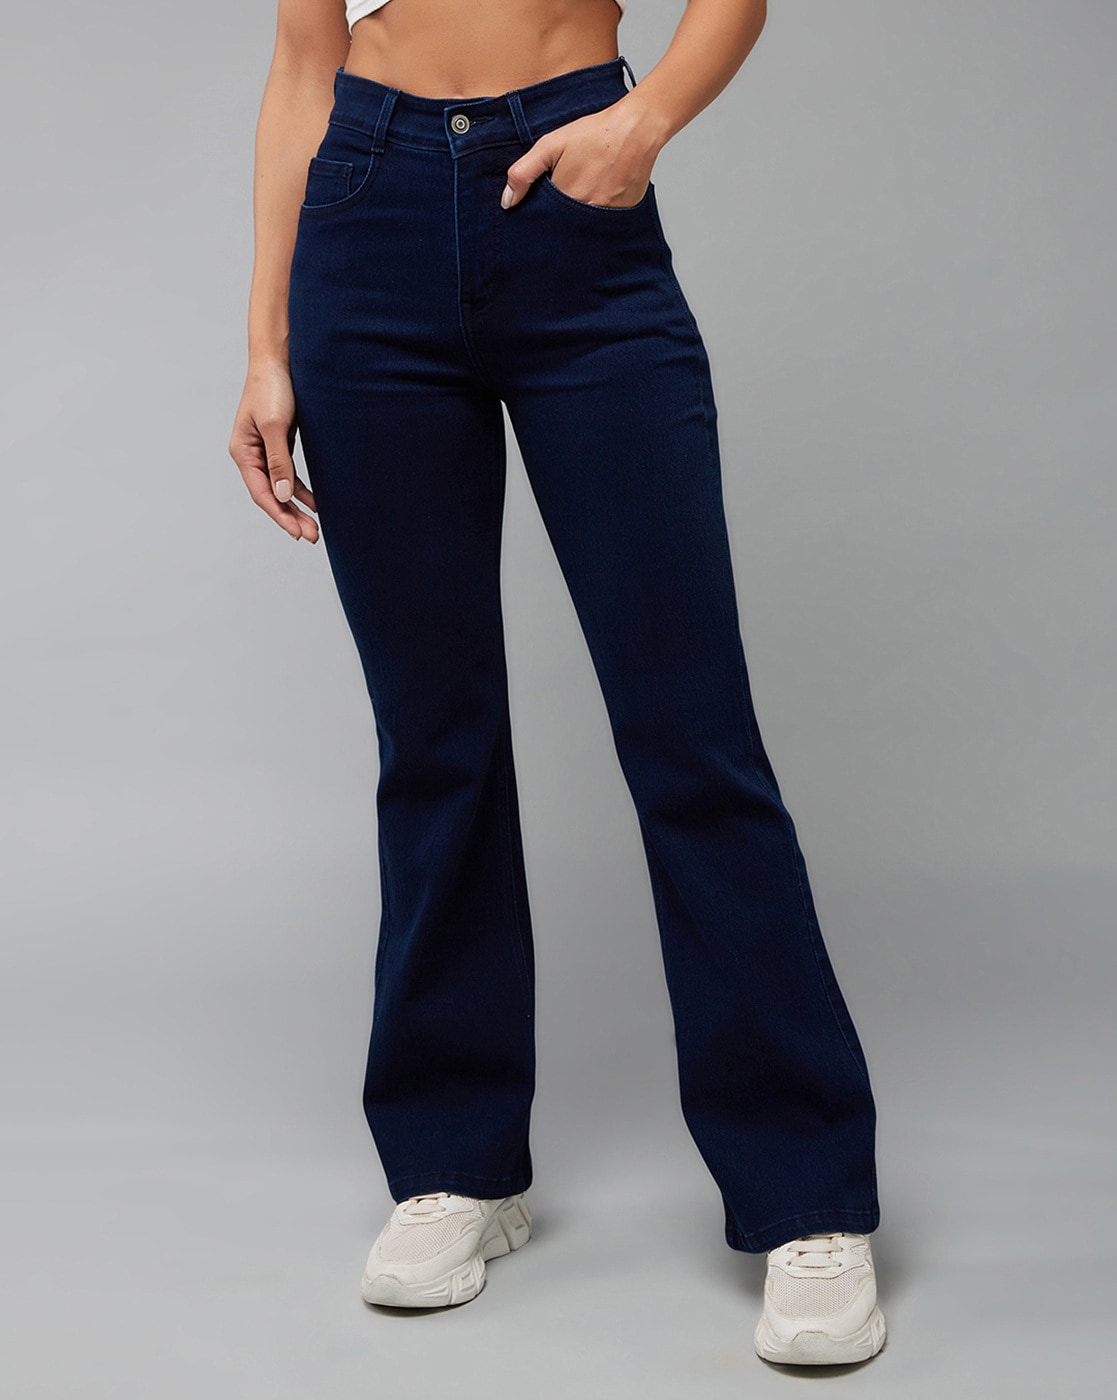 Re High Waist Ladies Bell Bottom Pant at Rs.200/Piece in surat offer by  Deltin Hub